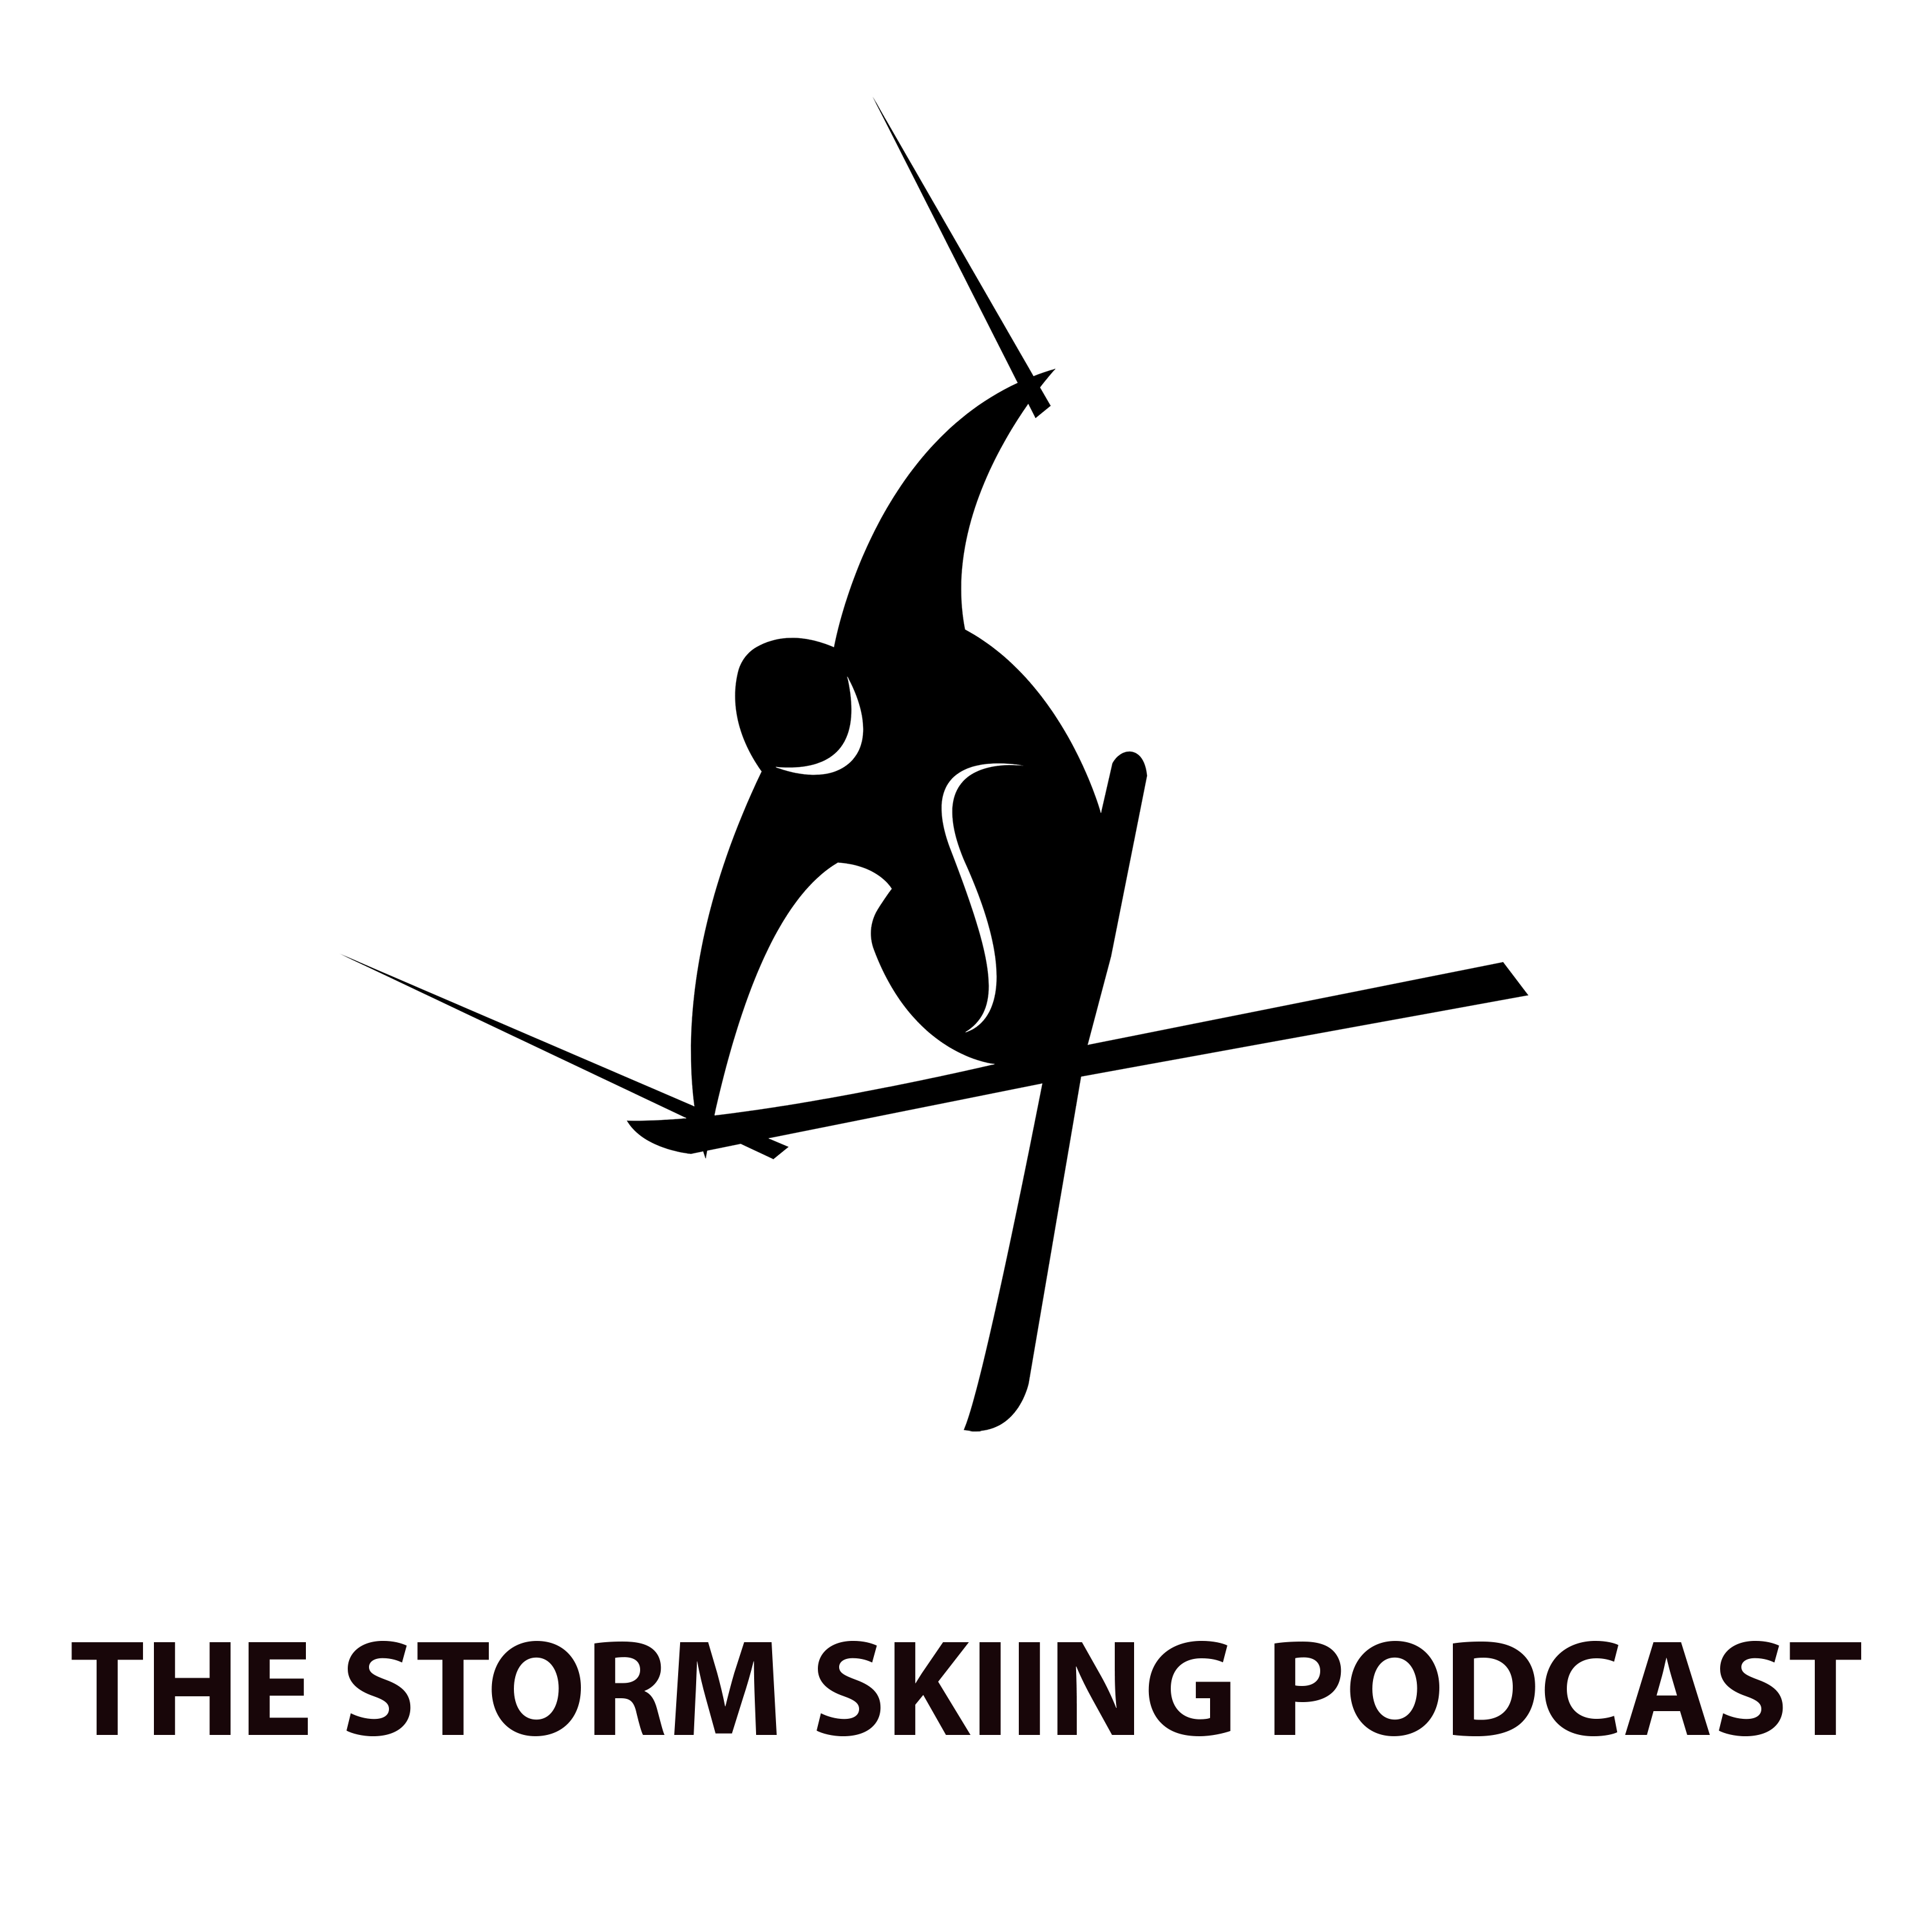 COVID-19 & Skiing Podcast #1: Author and Industry Veteran Chris Diamond - Optimism for the Future